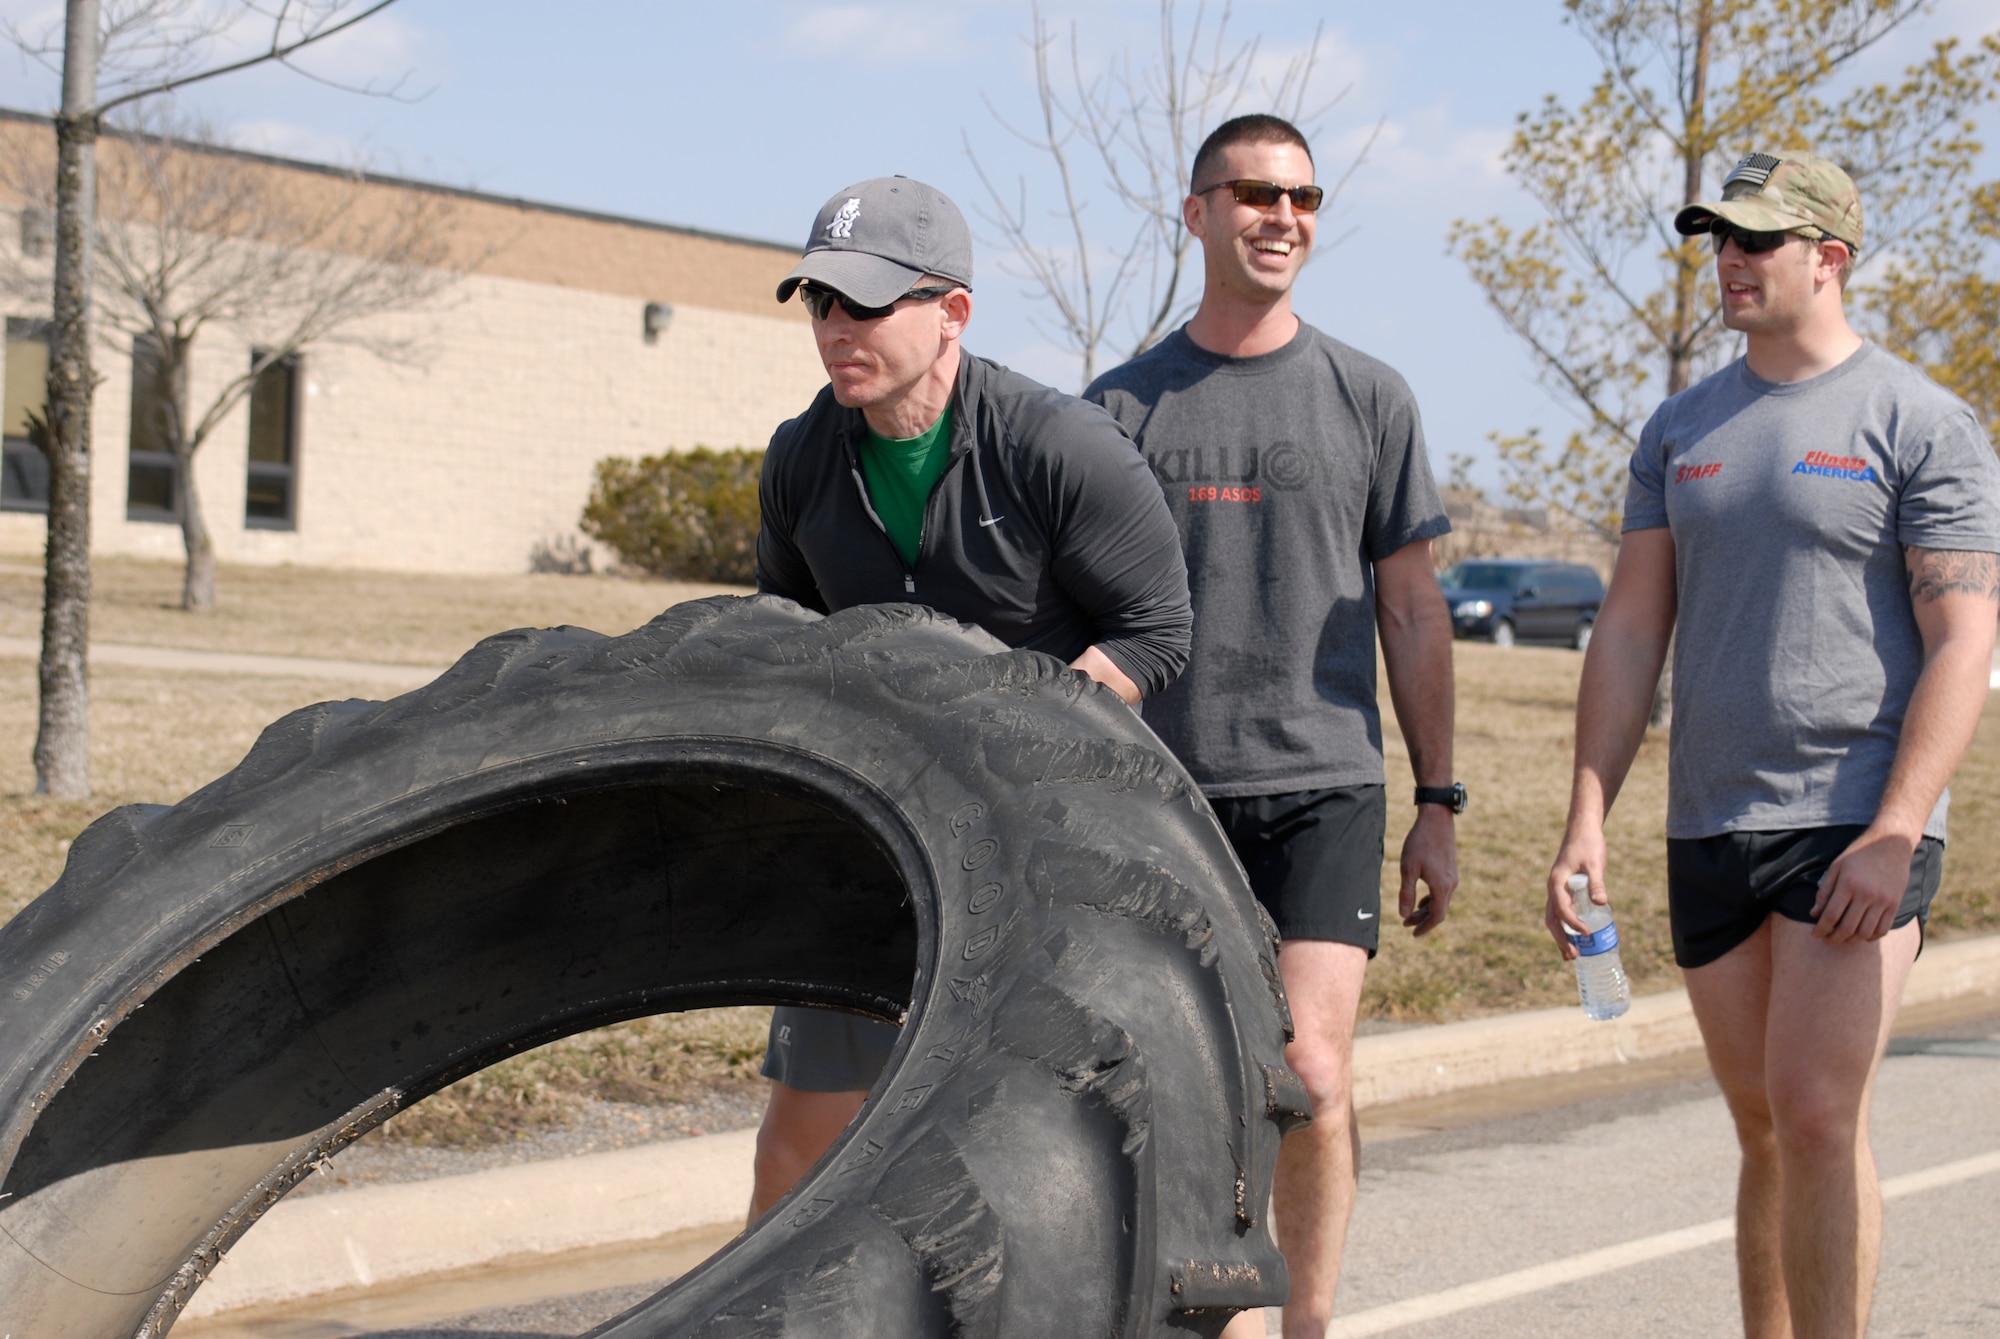 U.S. Air Force Capt. Daniel Curtin and fellow Tactical Air Control Party specialists flip a 230 pound tractor tire across the final lap of the TACP Association 24 Hour Run Challenge at the 182nd Airlift Wing in Peoria, Ill., March 29, 2013.  Sixty-two runners ran 161.75 miles around the installation over the course of 24 hours and raised over $8,200 in support of the TACP community and their families.  The 182nd team also ran in remembrance of Staff Sgt. Jacob Frazier, a member of the Peoria-based 169th Air Support Operations Squadron who was killed in action near Geresk, Afghanistan, exactly 10 years earlier.  (U.S. Air Force photo by Staff Sgt. Lealan Buehrer//Released)